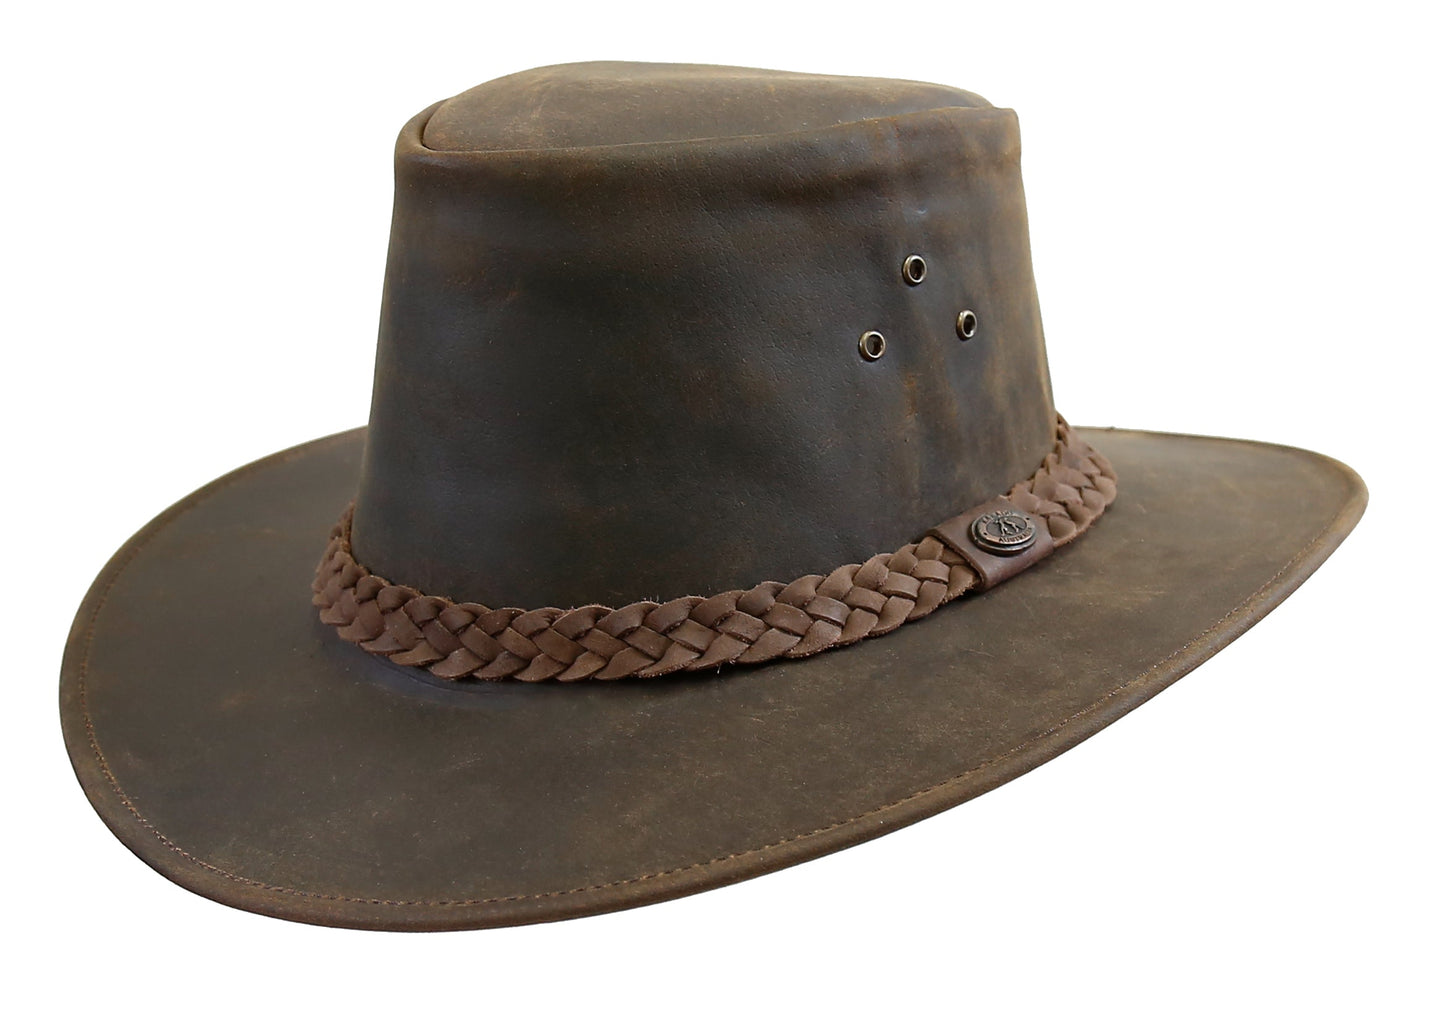 Cowboy leather hat for women and men made of robust leather | Remaining item